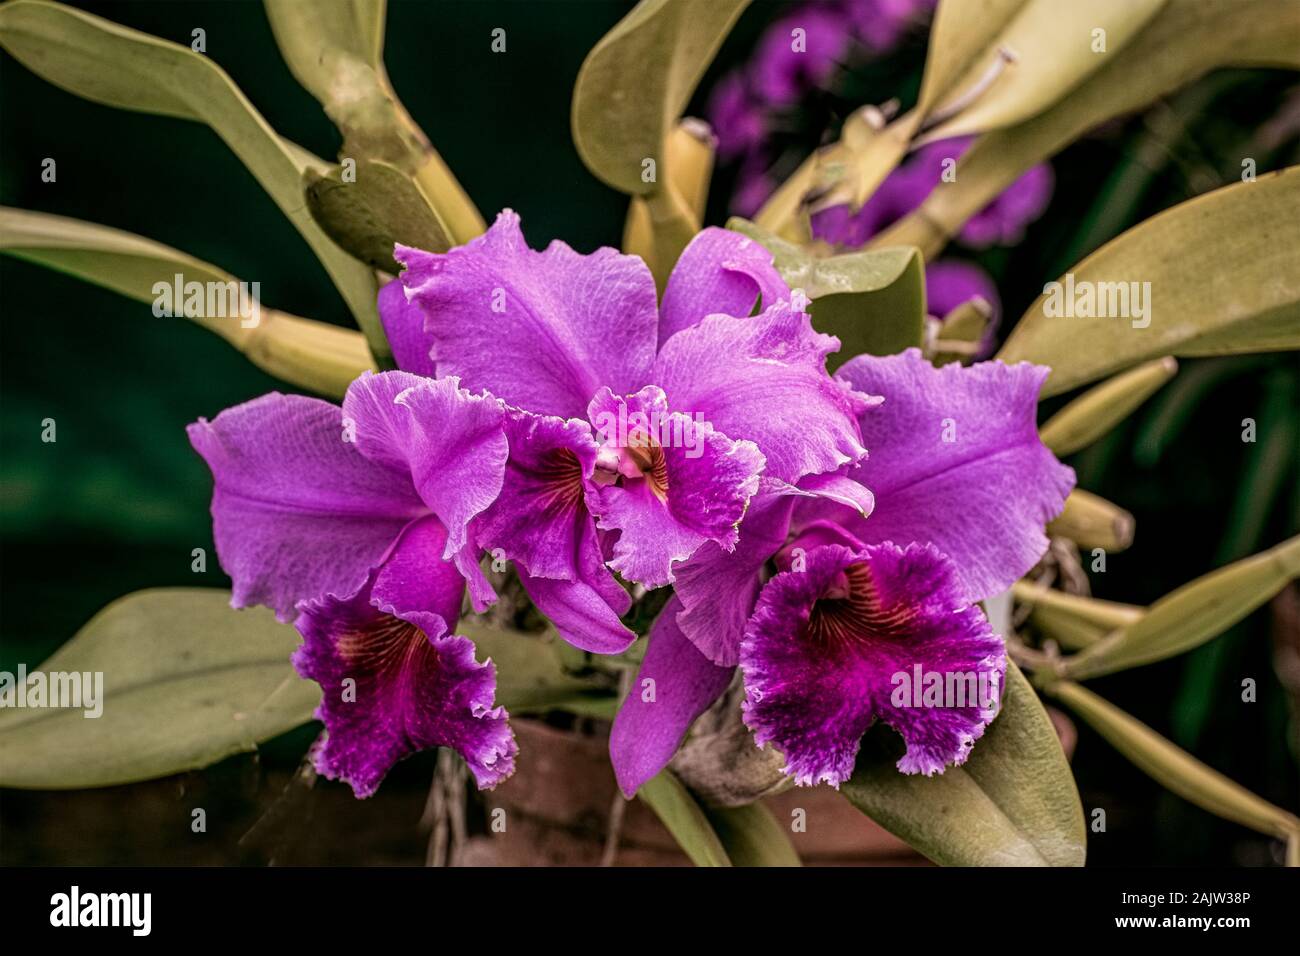 Flower-Orchid-Cataleya-La tuilierie-Awinter.garden,cultivated,flower,Kolkata ,exhibition,India. Stock Photo